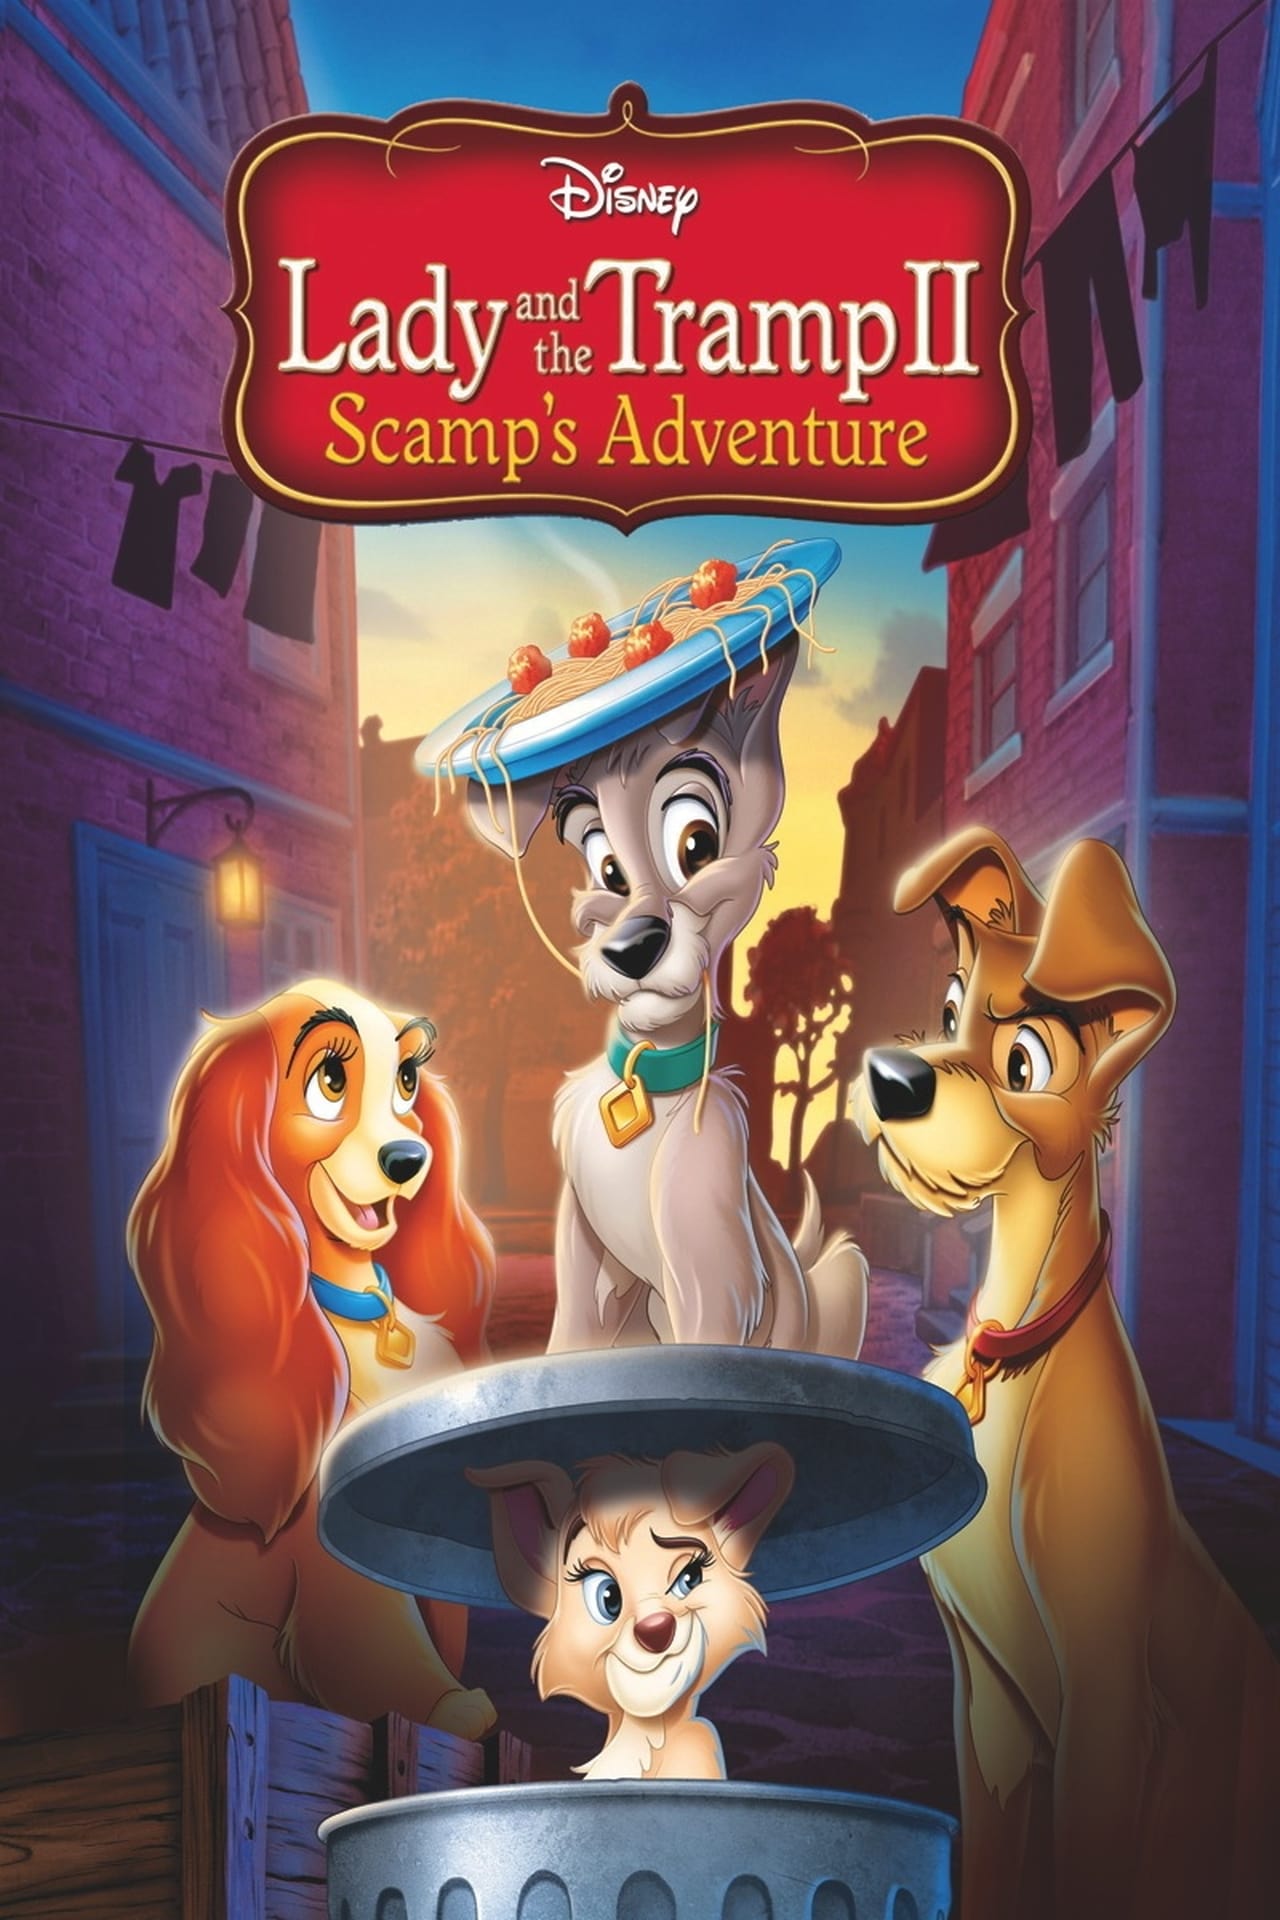 Lady and the Tramp II: Scamp's Adventure (2001) 256Kbps 23.976Fps 48Khz 5.1Ch Disney+ DD+ E-AC3 Turkish Audio TAC